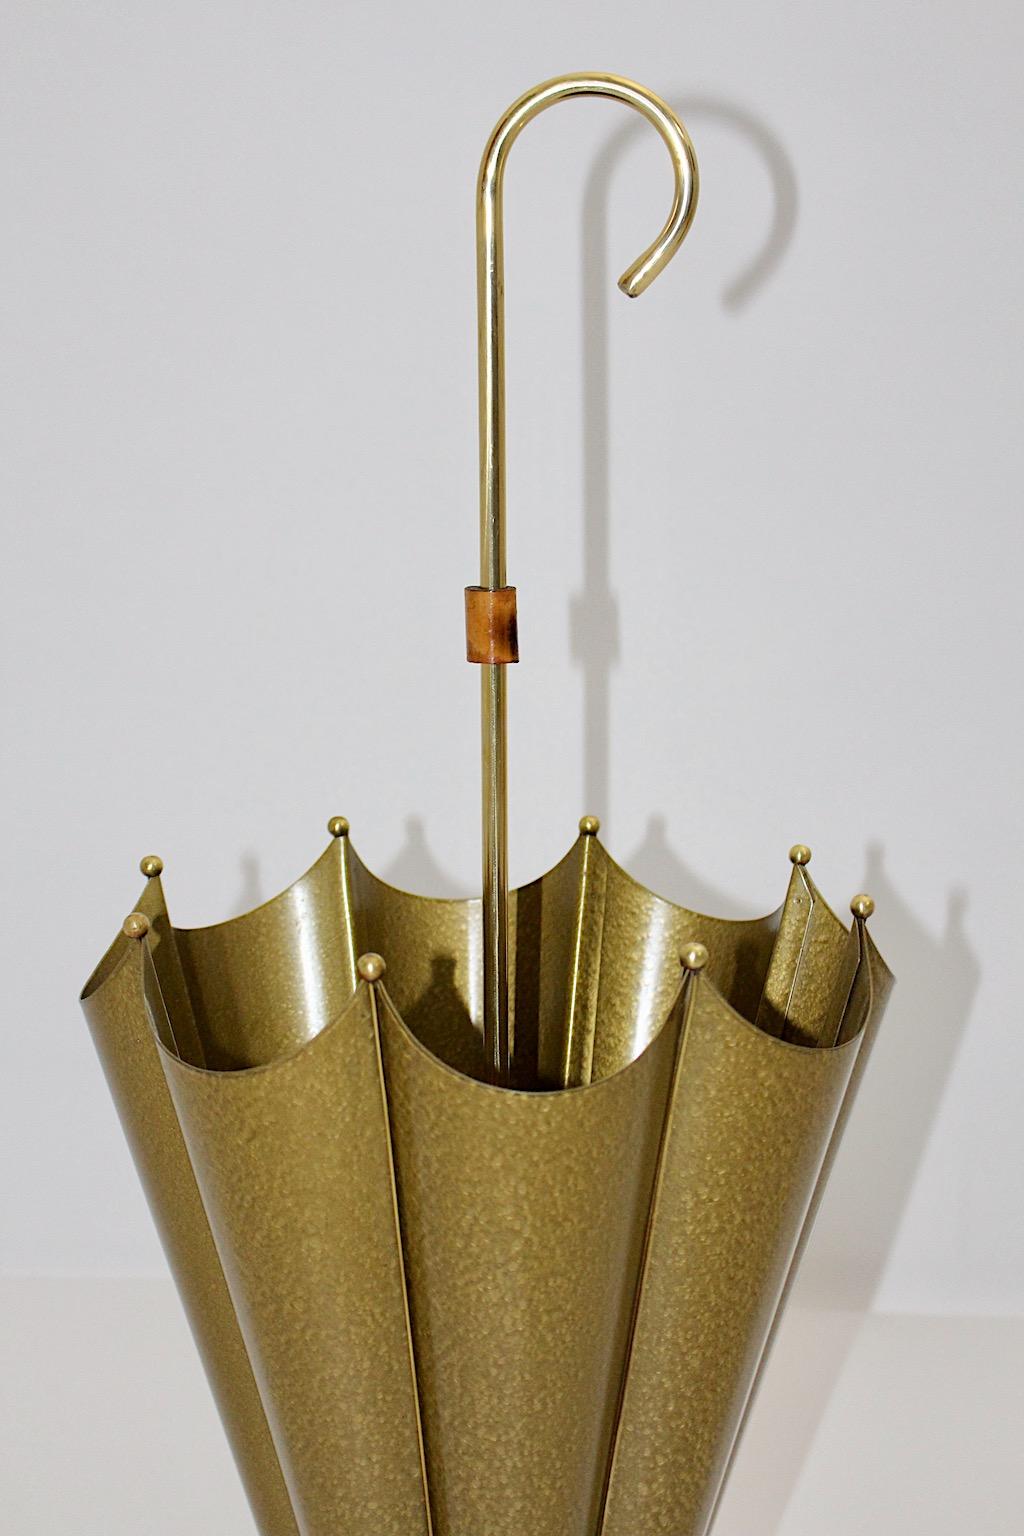 Mid-20th Century Mid-Century Modern Vintage Golden Metal Bamboo Umbrella Stand Italy 1950s For Sale